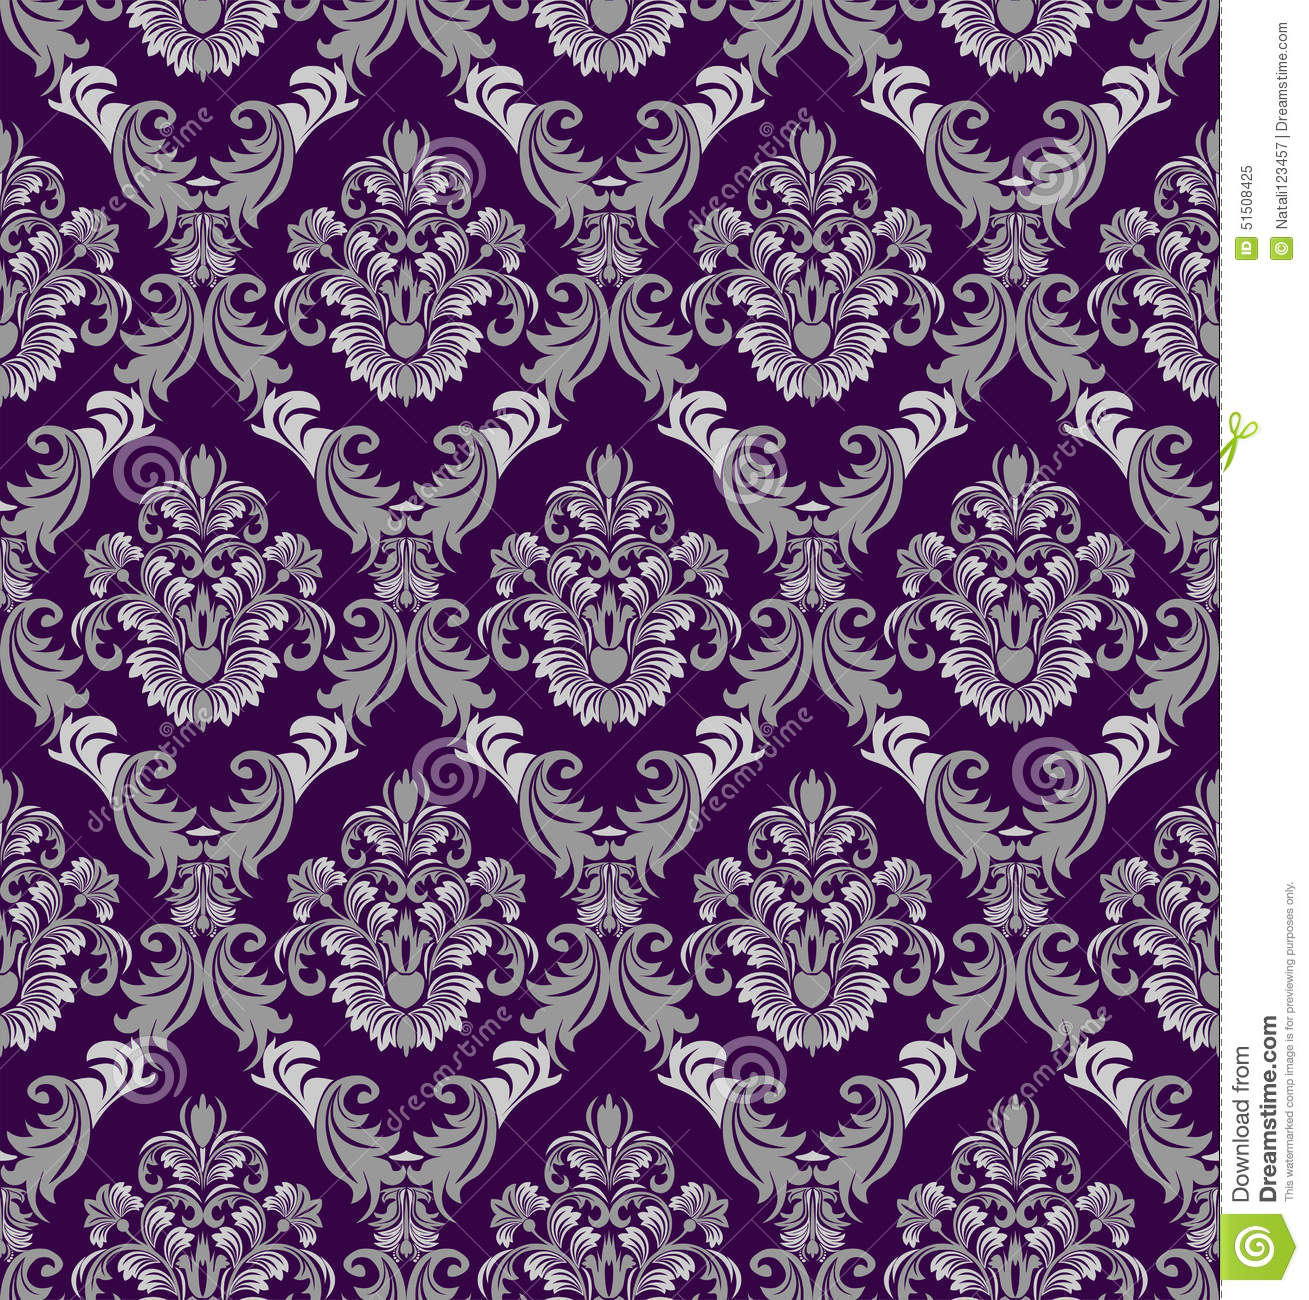 Seamless Damask Wallpaper In Victorian Style For Design